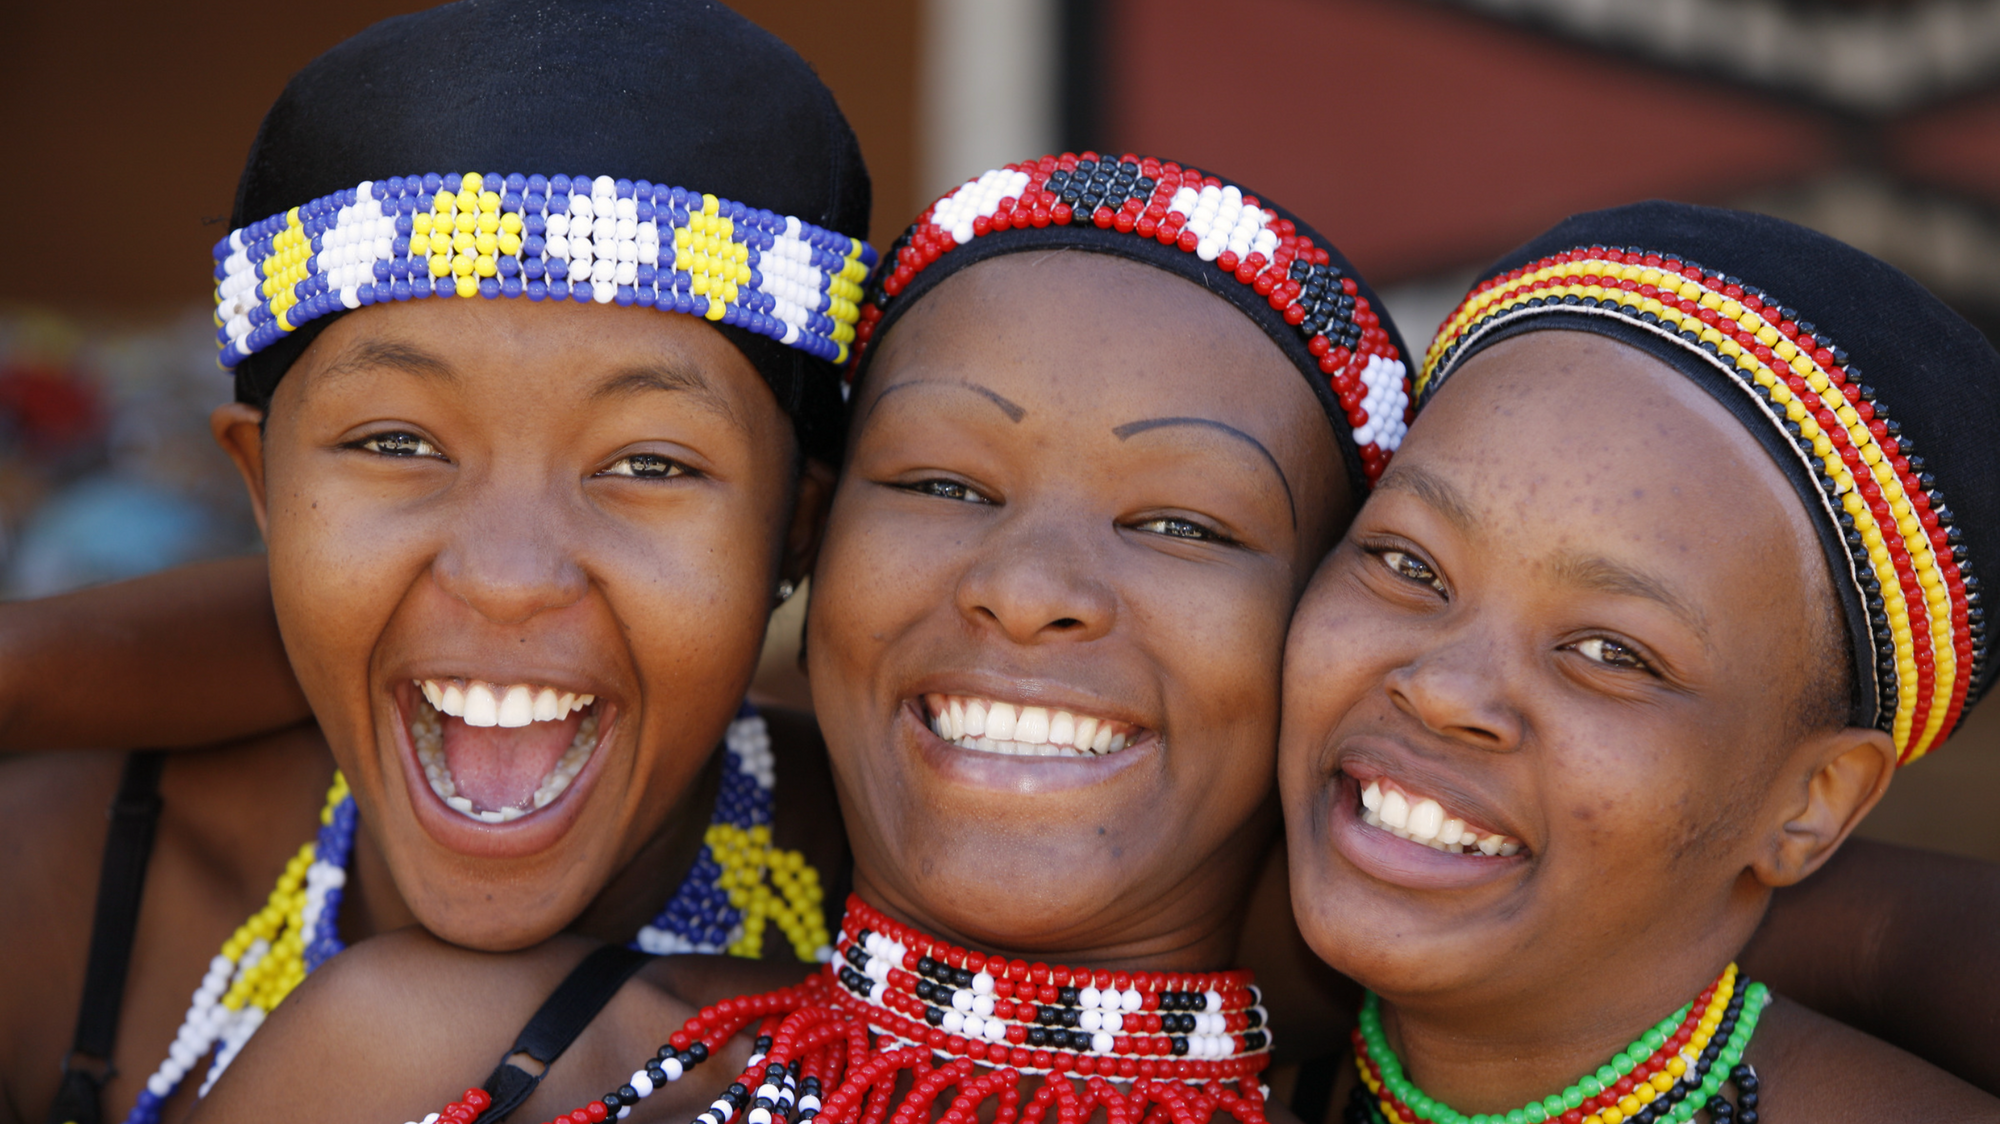 Our Clinic #11: Sandanjalo Blose’s Midwifery Journey in South Africa